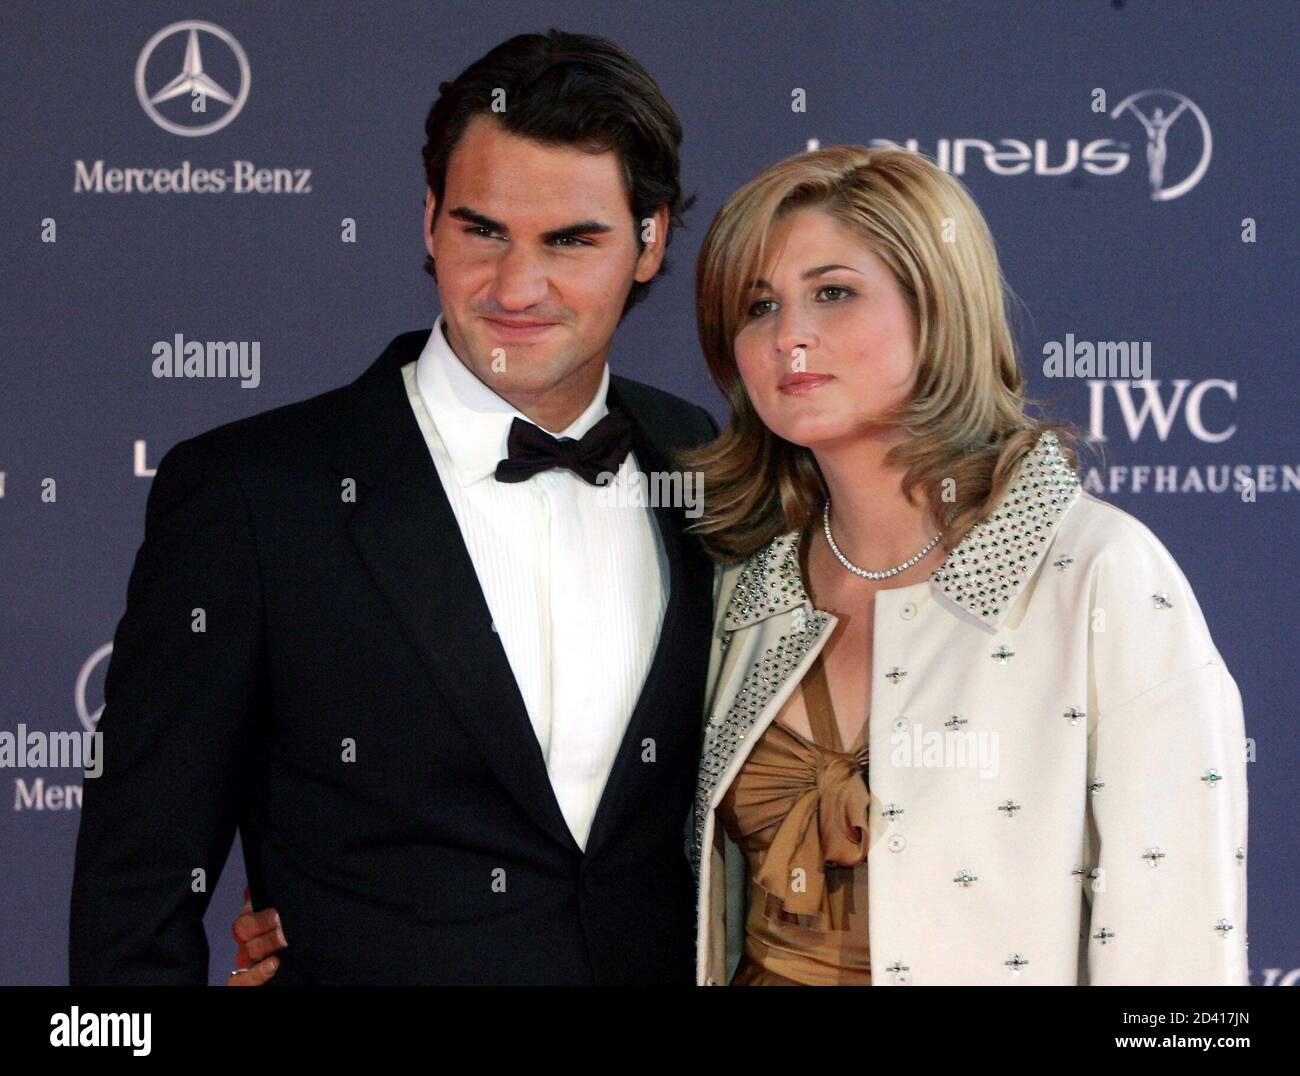 Page 3 - Girlfriend Roger Federer High Resolution Stock Photography and  Images - Alamy